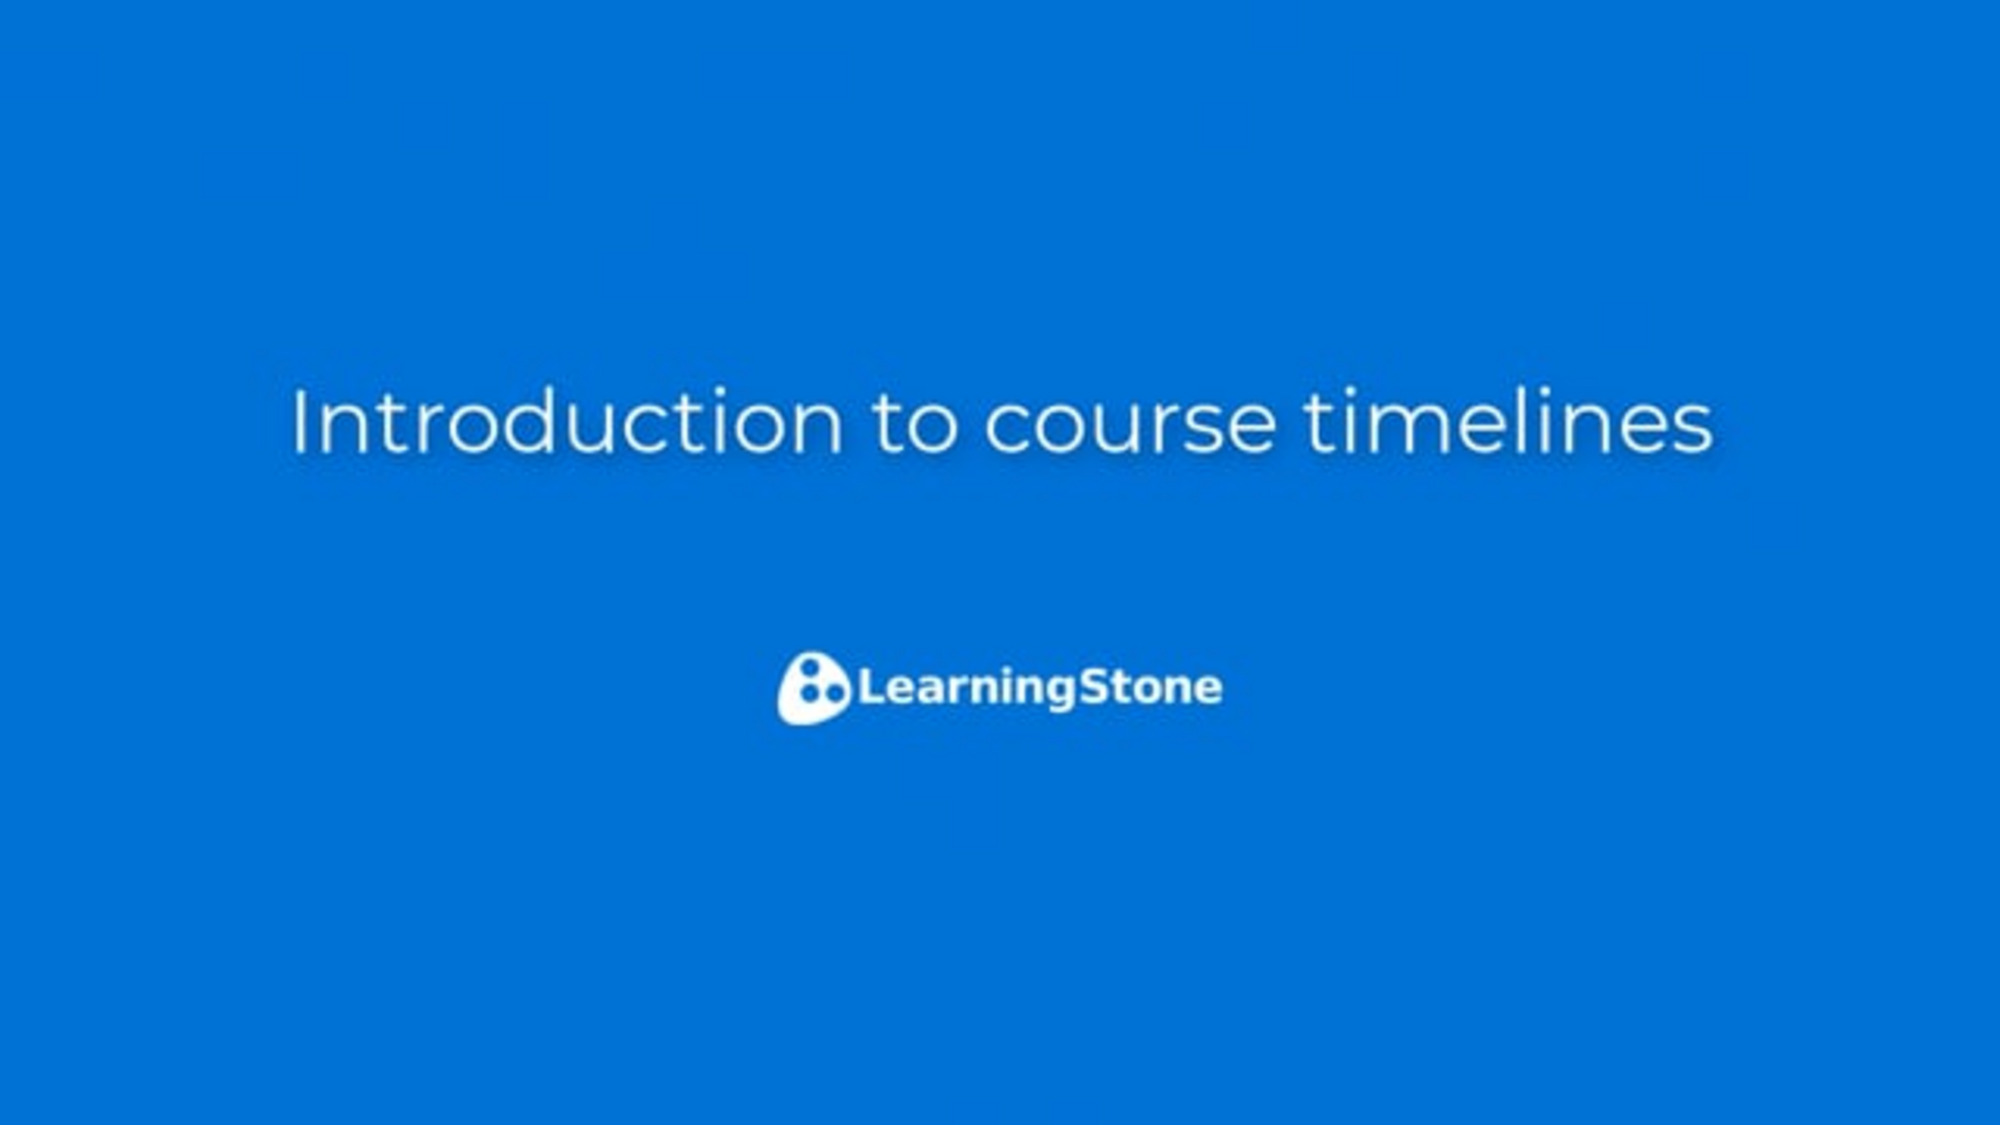 700. Introduction to course timelines